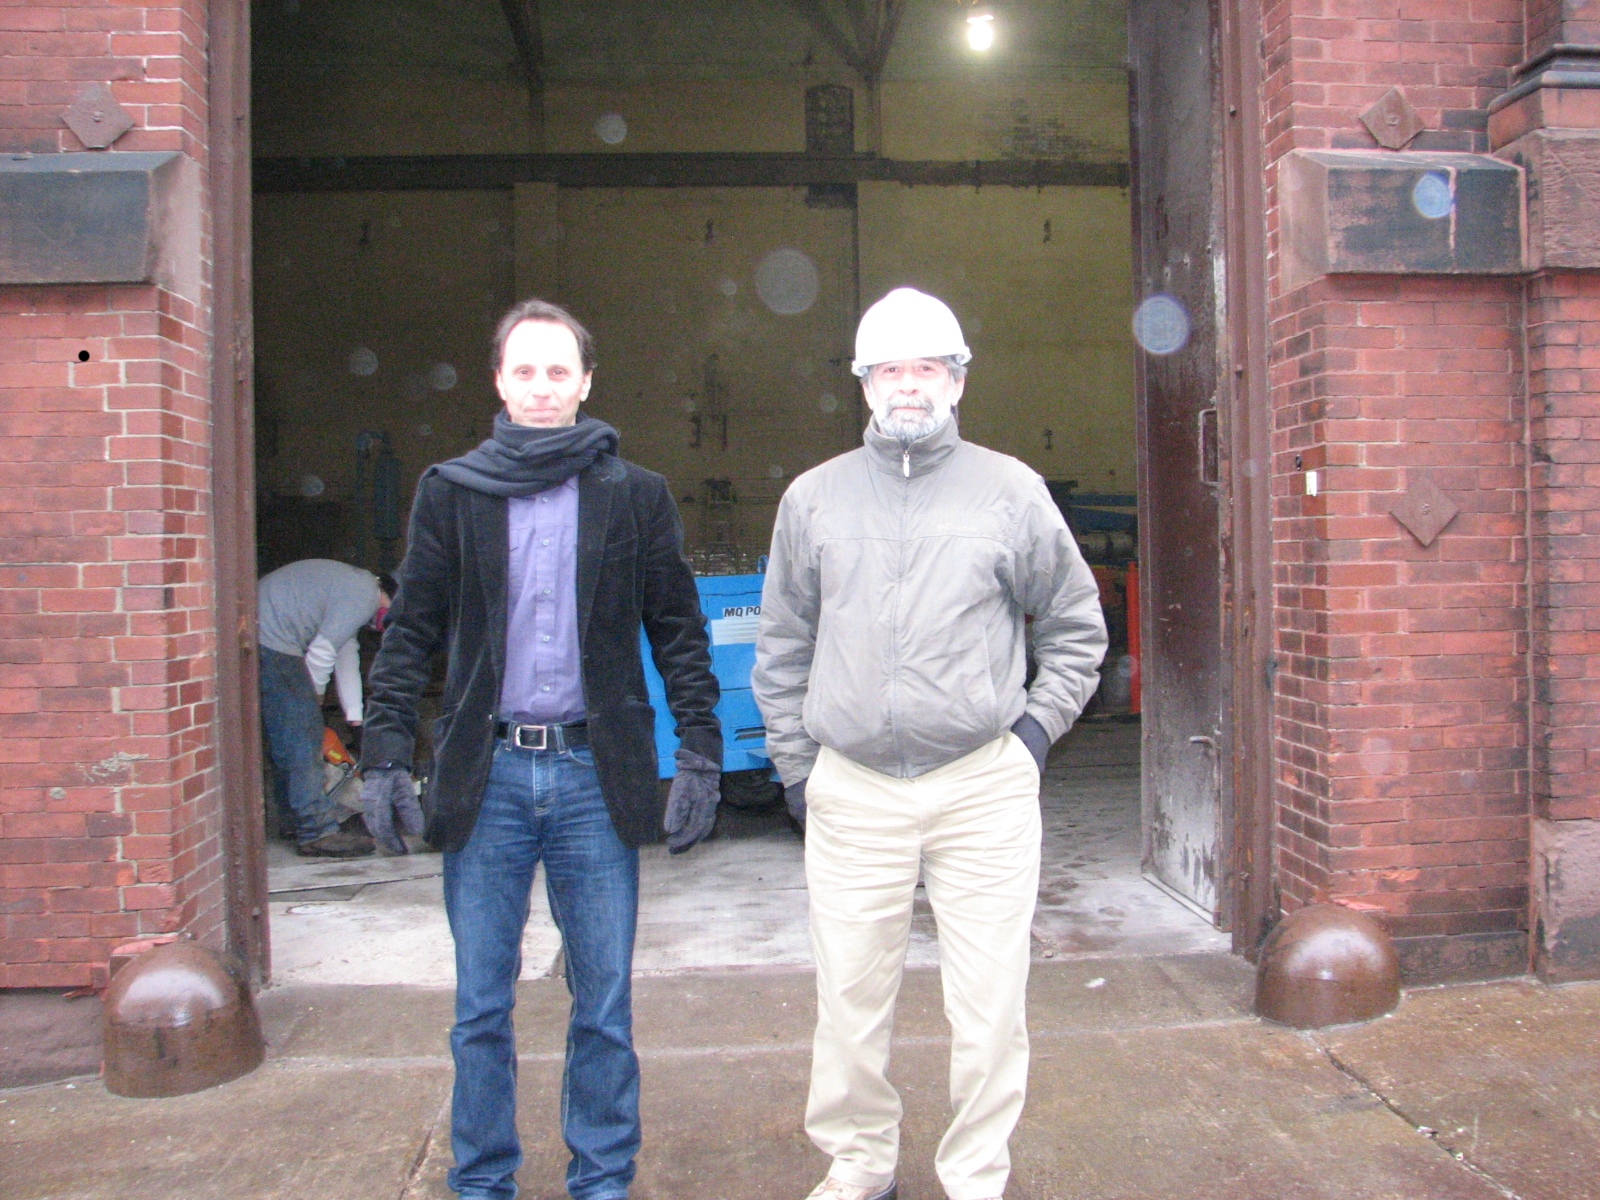 Philly Fringe President and Producing Director Nick Stuccio and Jeffrey M. Brown Associatiates Superintendent Greg Buzzard stand outside what will be the front door.